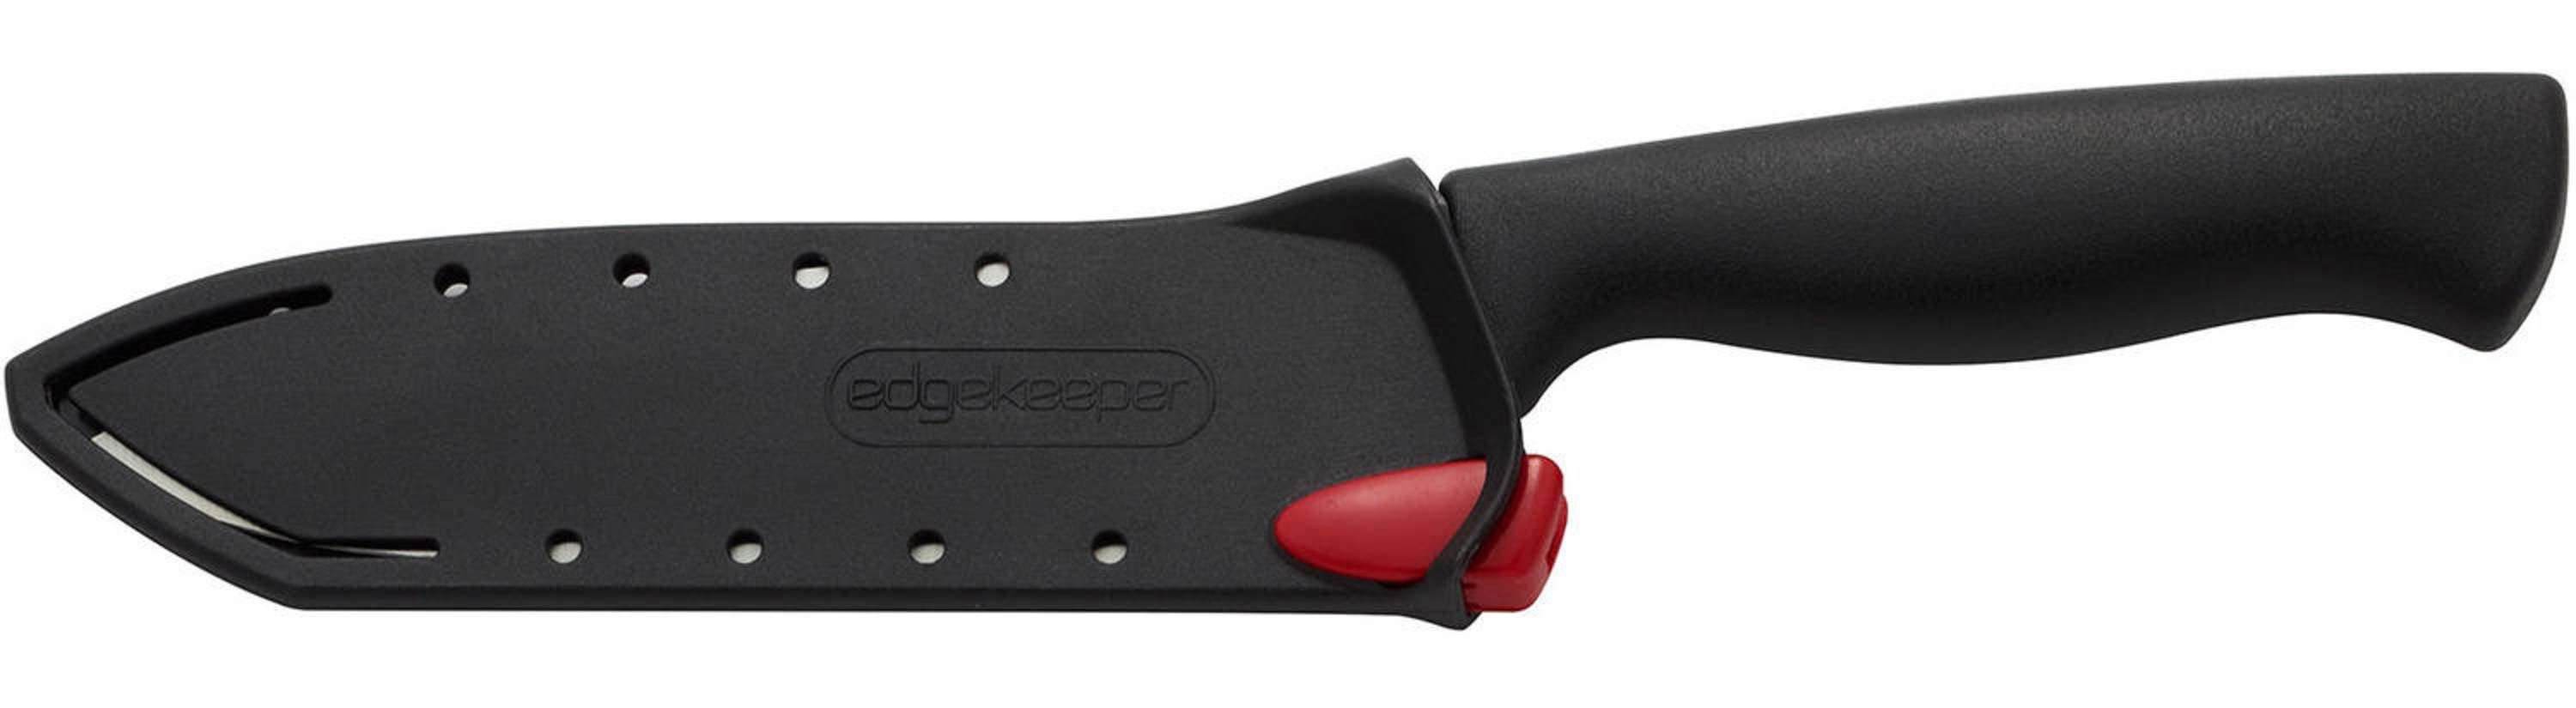 A 6-inch chef knife with a self-sharpening sleeve